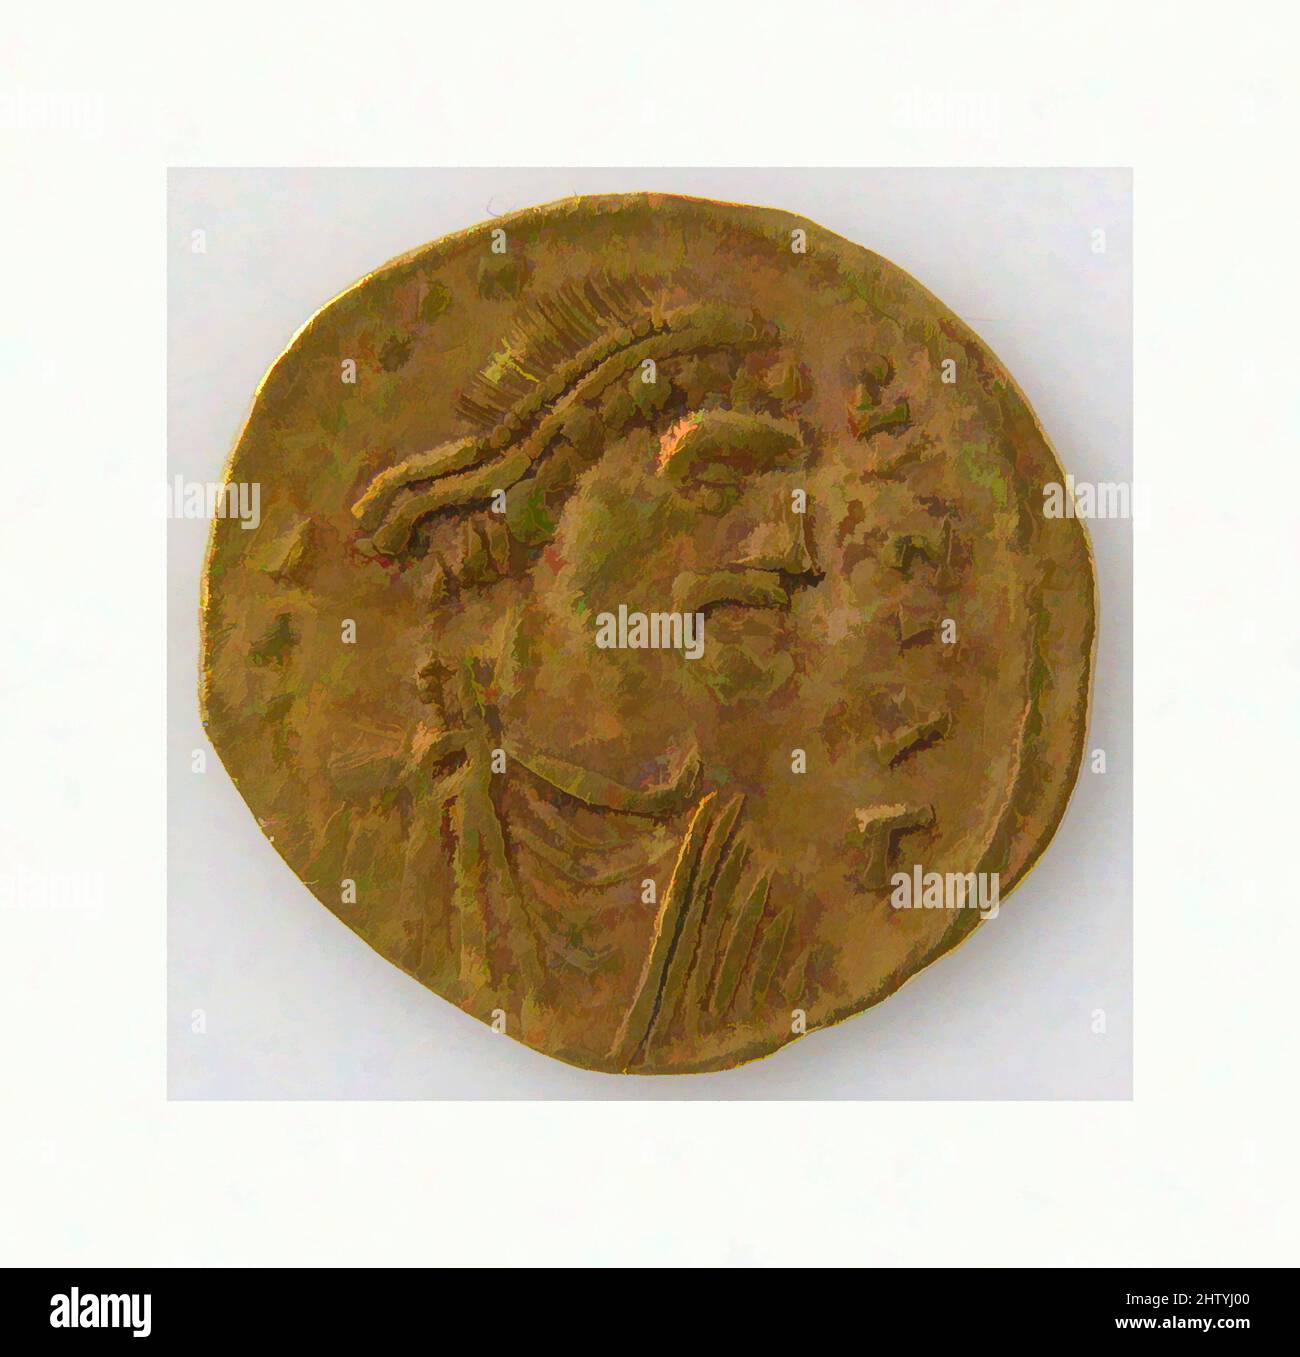 Art inspired by Tremissis, ca. 668–685, Byzantine, Gold, Overall: 9/16 x 1/16 in. (1.5 x 0.1 cm), Coins, Classic works modernized by Artotop with a splash of modernity. Shapes, color and value, eye-catching visual impact on art. Emotions through freedom of artworks in a contemporary way. A timeless message pursuing a wildly creative new direction. Artists turning to the digital medium and creating the Artotop NFT Stock Photo